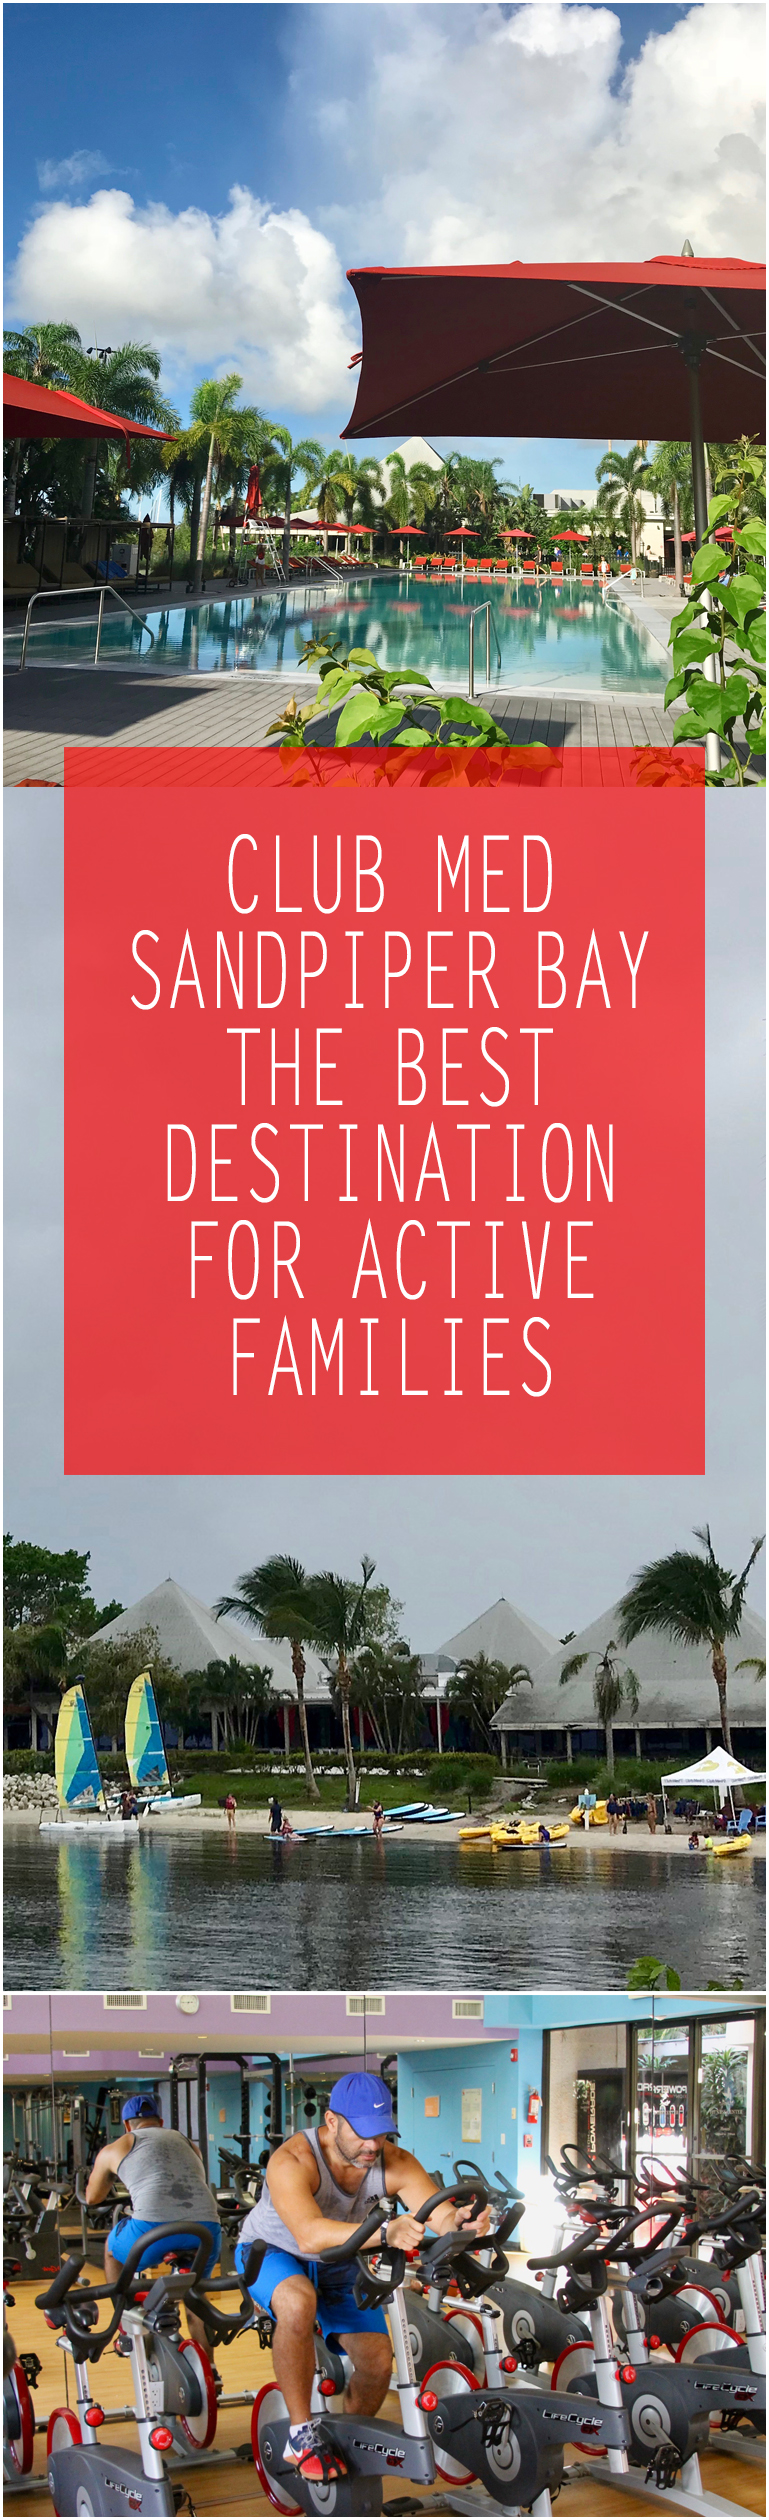 Why Club Med Sandpiper Bay is the best destination for active families.